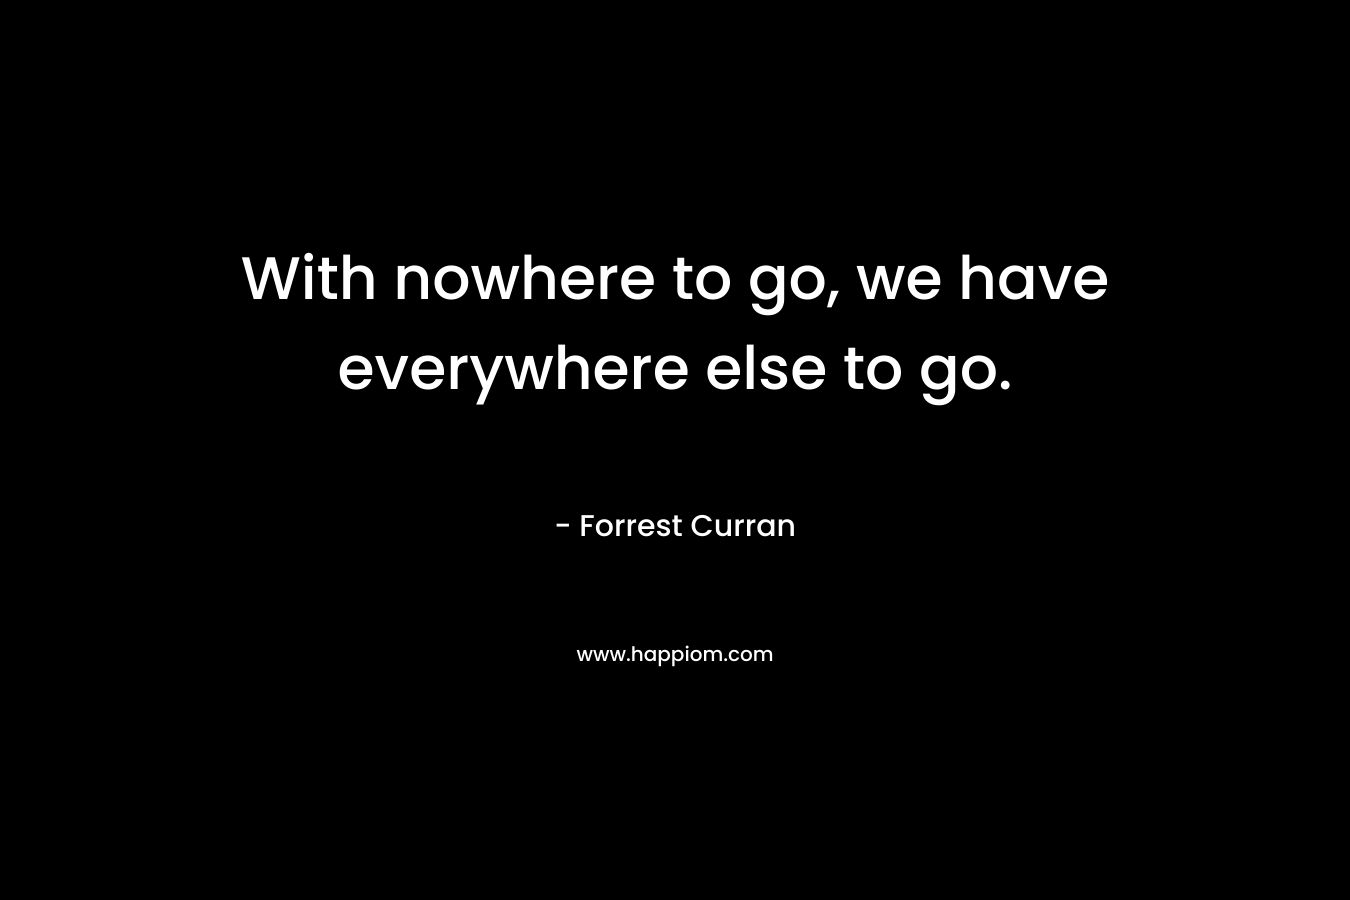 With nowhere to go, we have everywhere else to go. – Forrest Curran